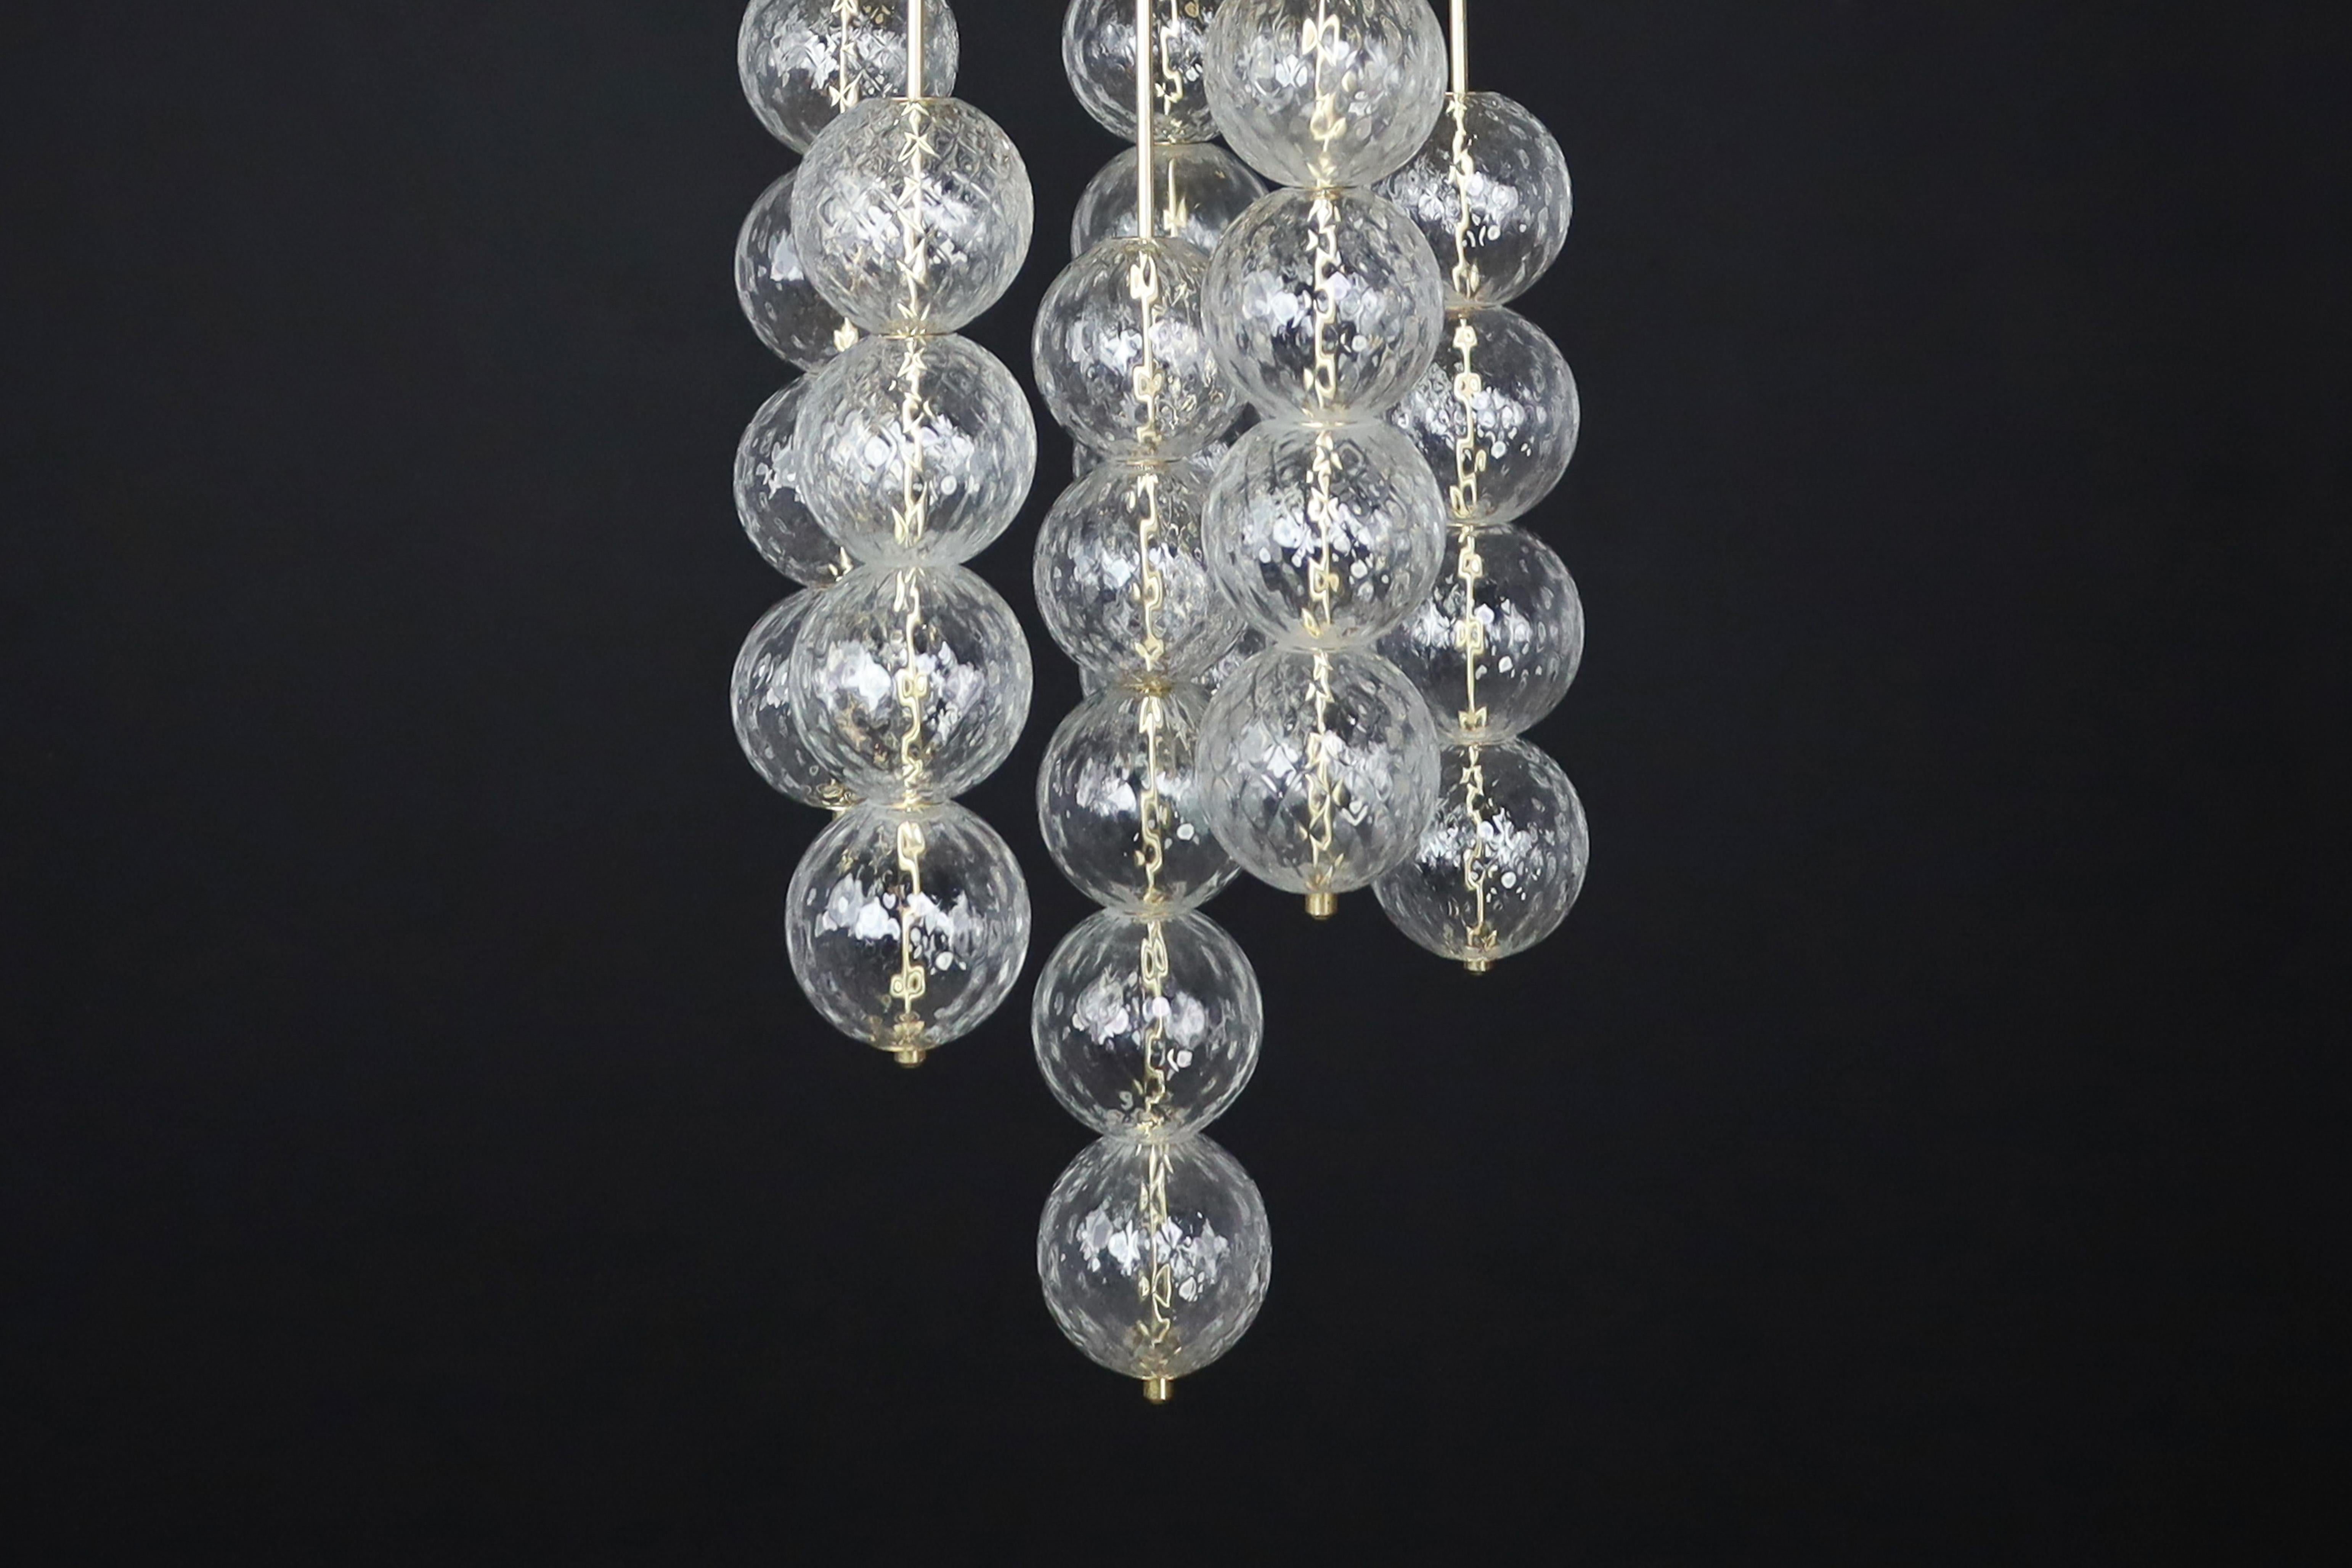 Large Chandelier with brass fixture and hand-blowed glass globes by Preciosa Cz. For Sale 4